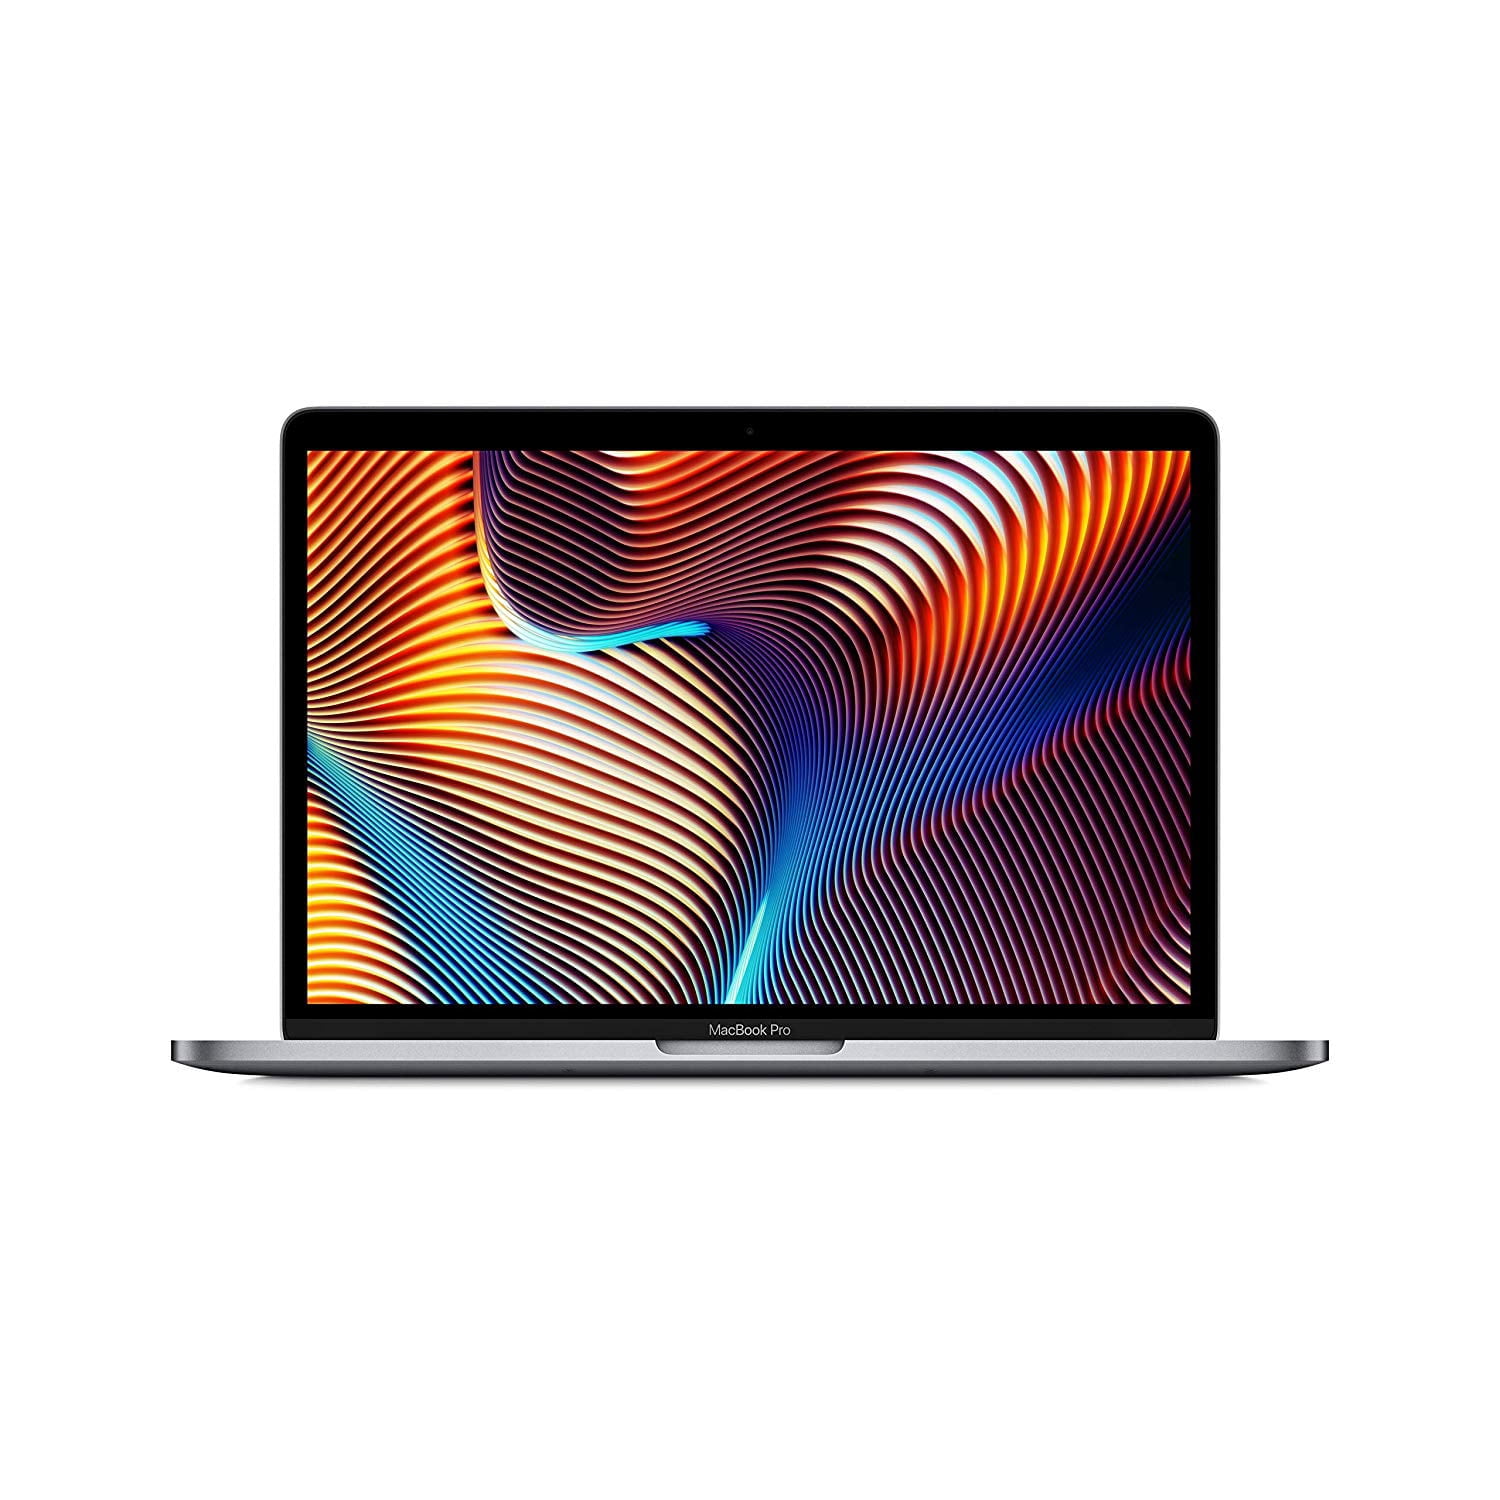 Apple MacBook Pro with Touch Bar MWP52FN/A - Début 2020 - Core i5